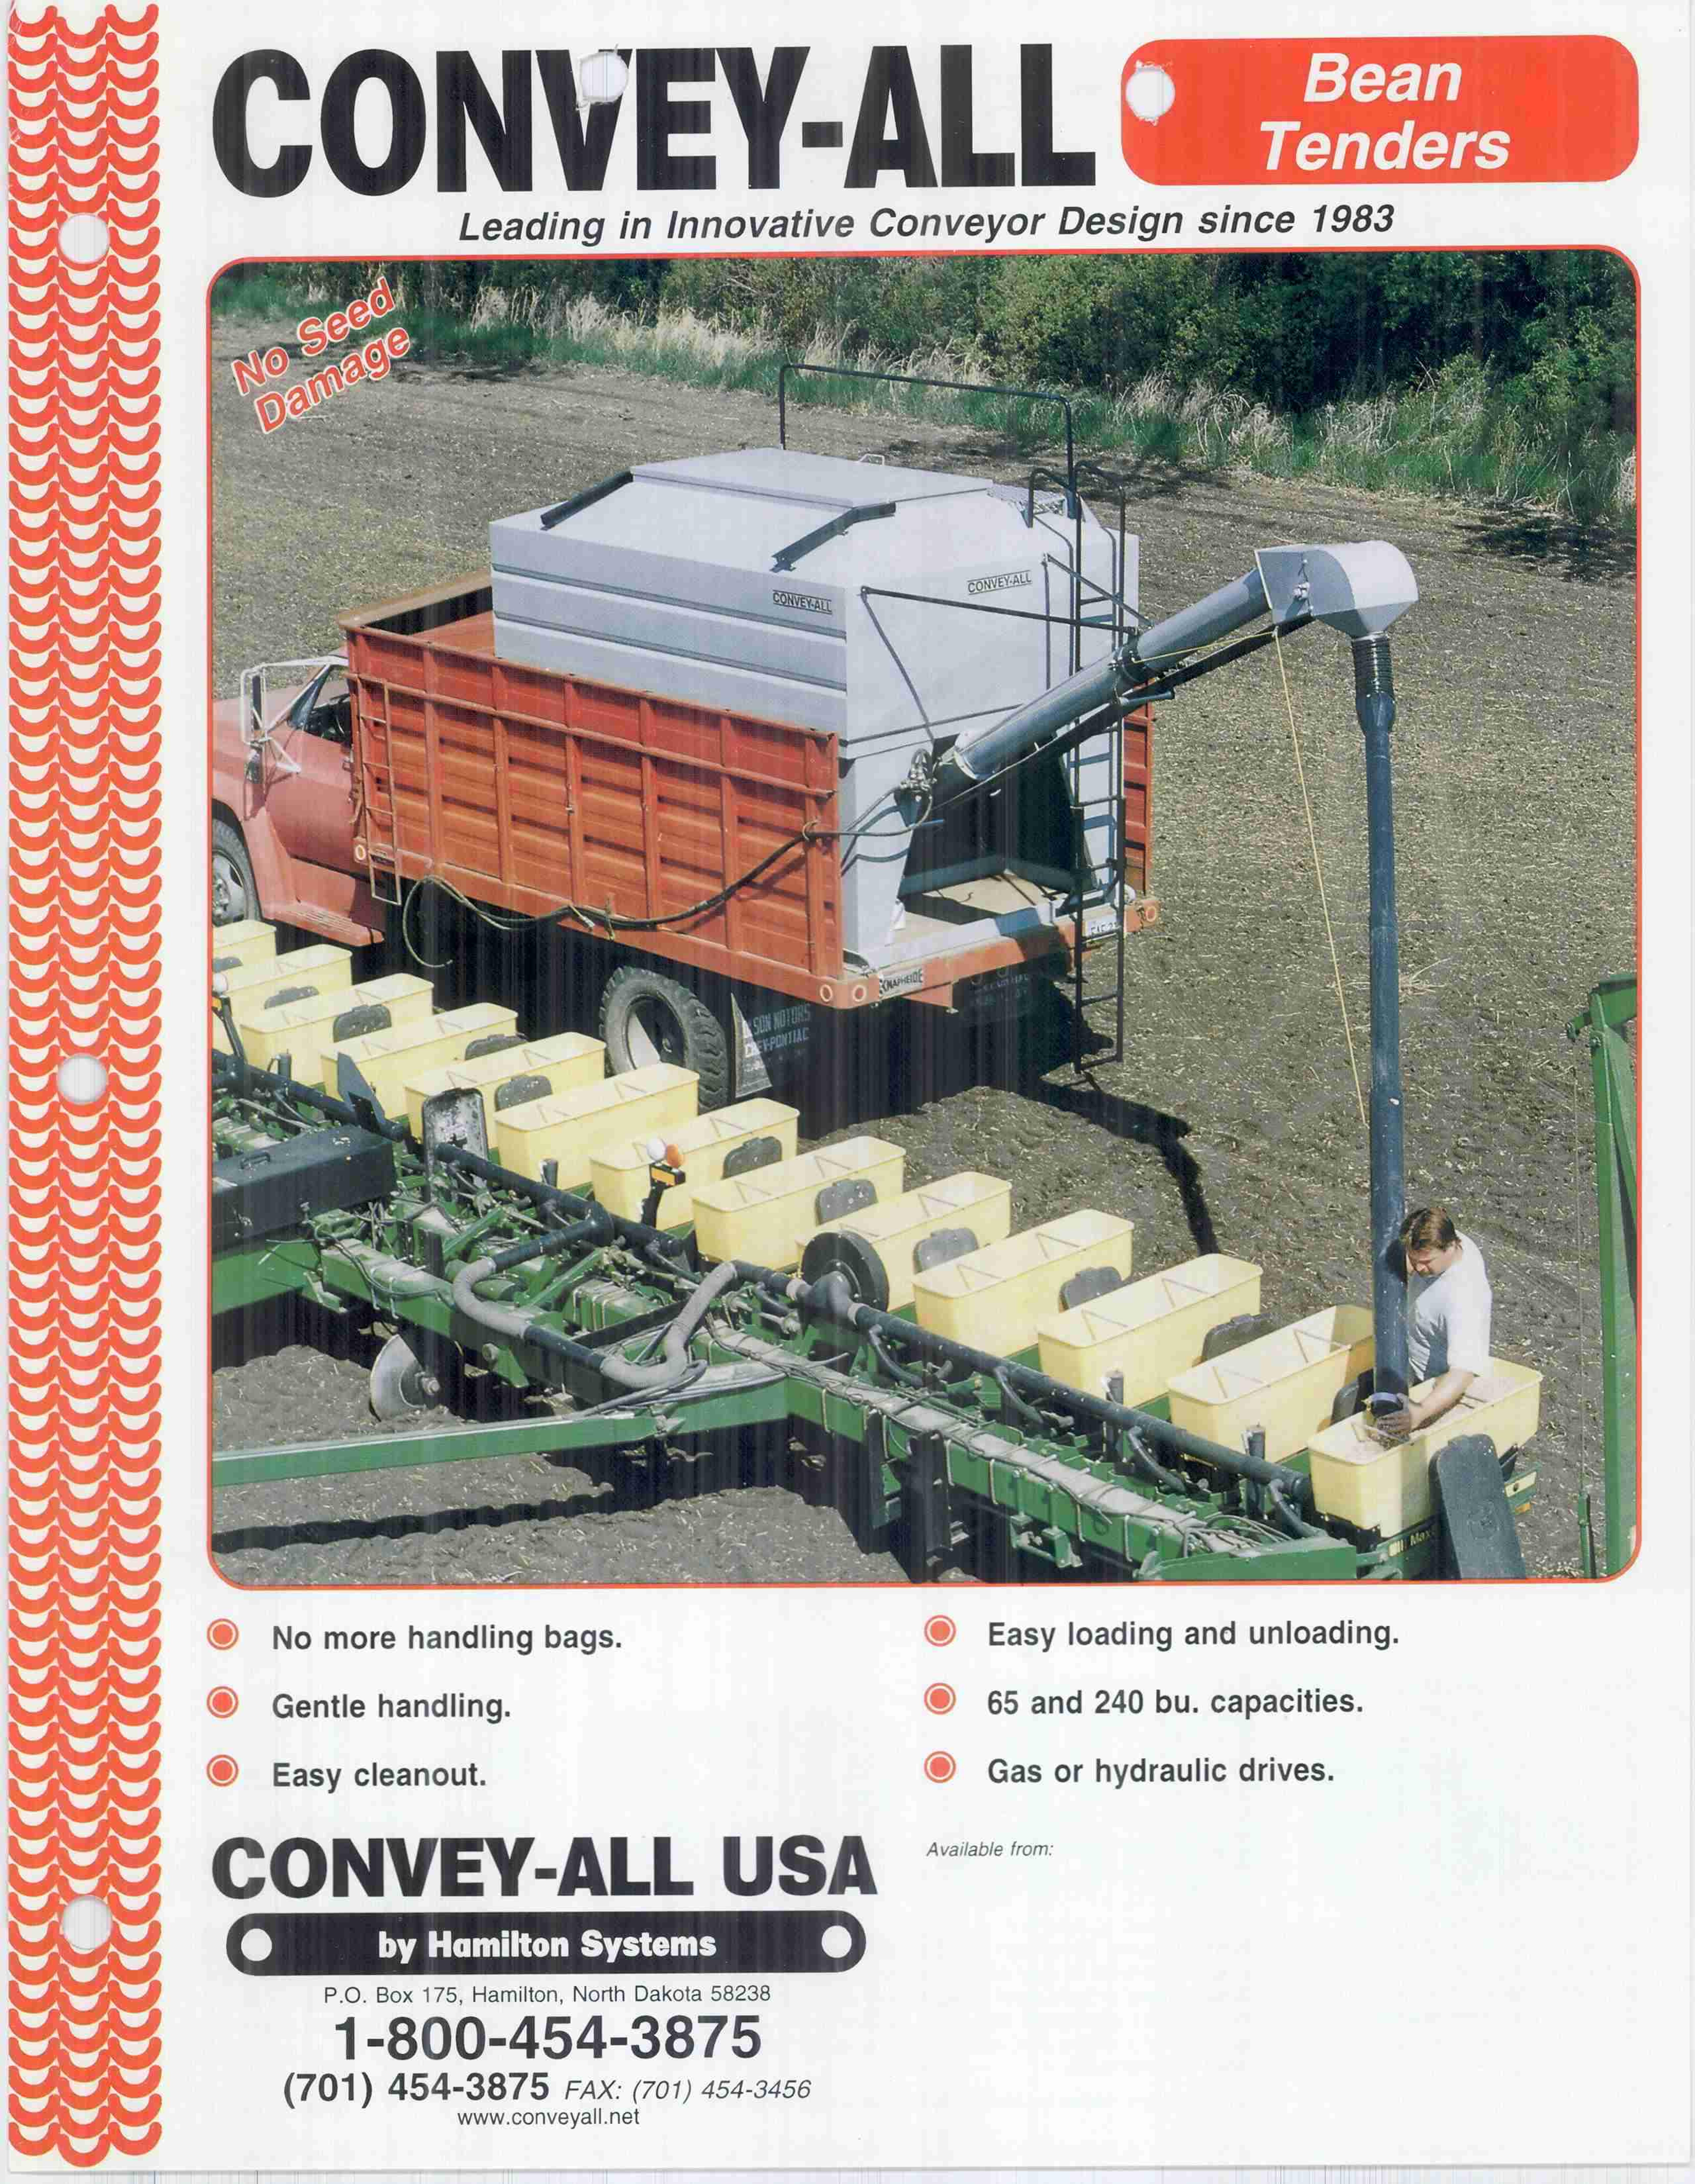 CONVEY-ALL